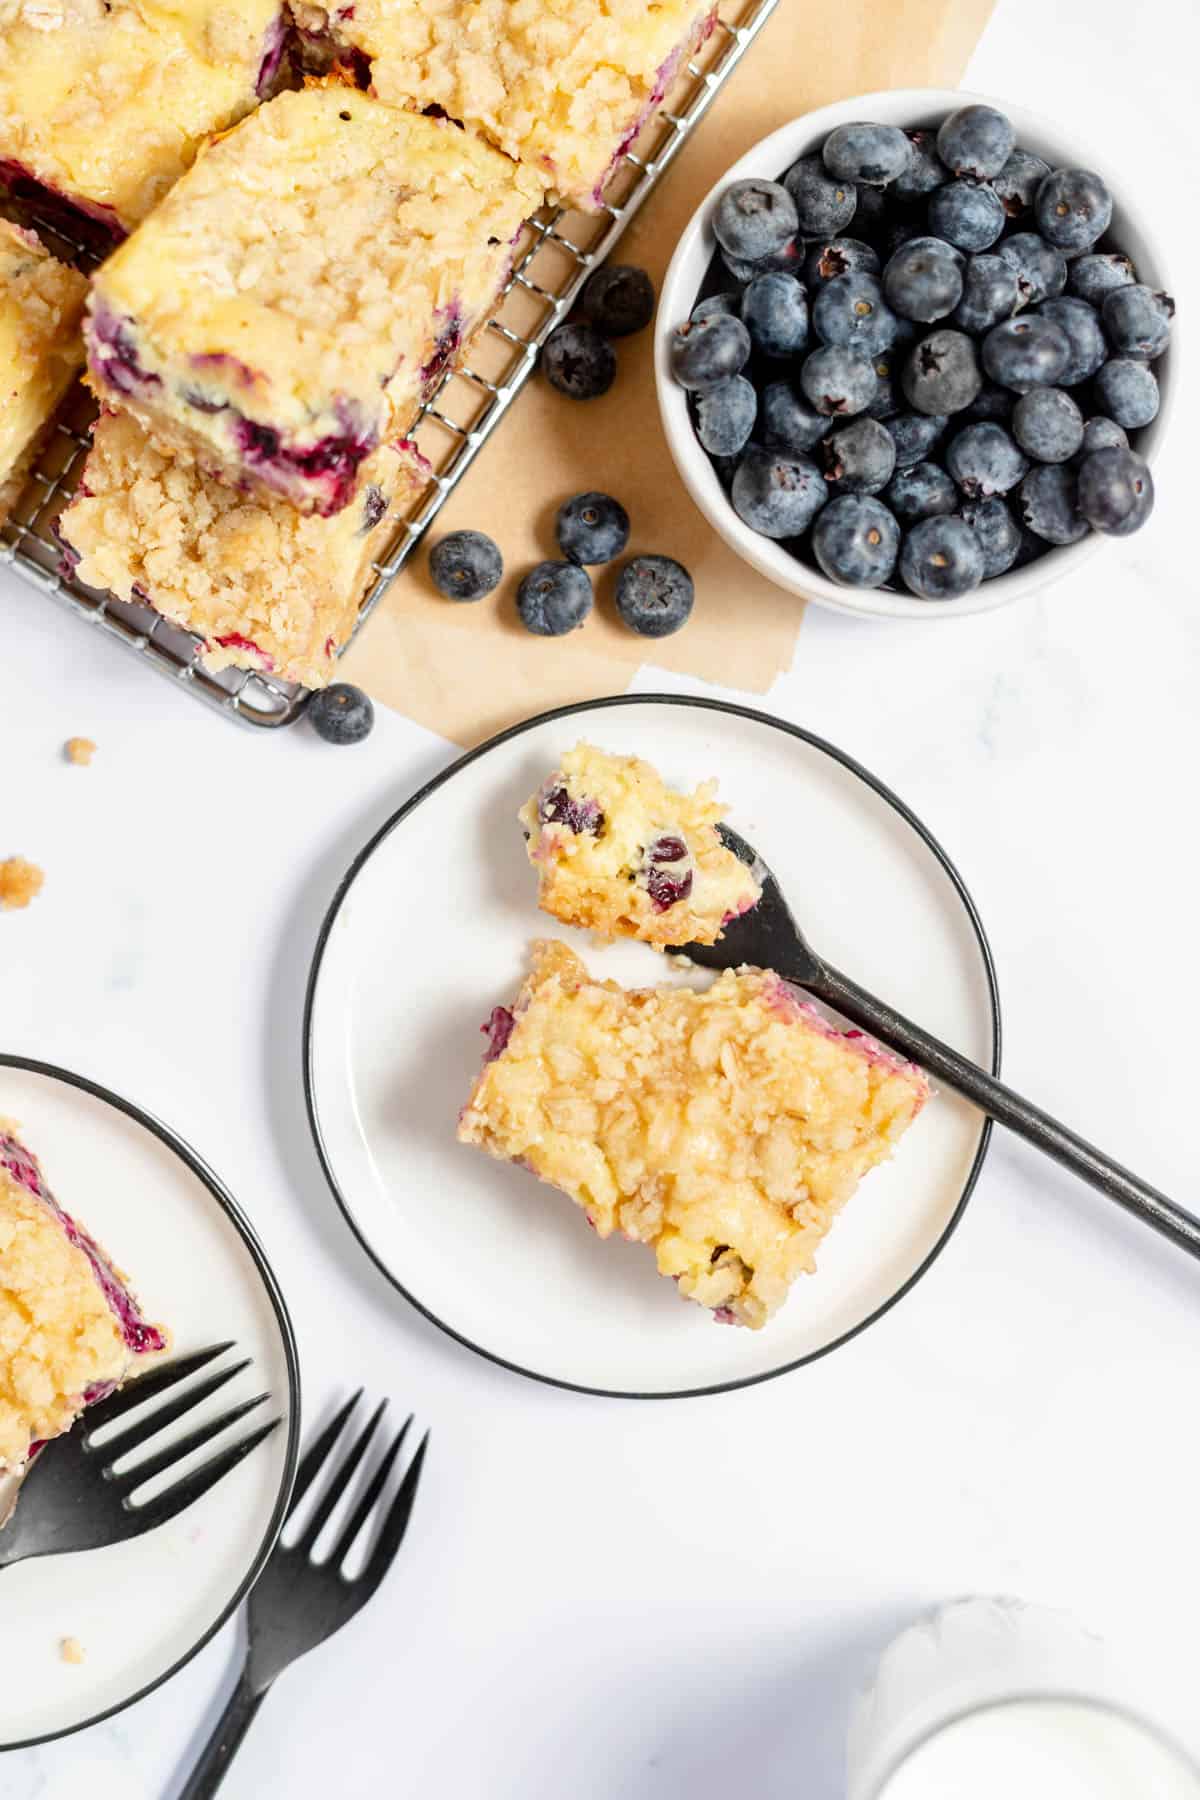 An overhead image of a blueberry cheesecake bar with a bite taken out of it next to a bowl of fresh blueberries.